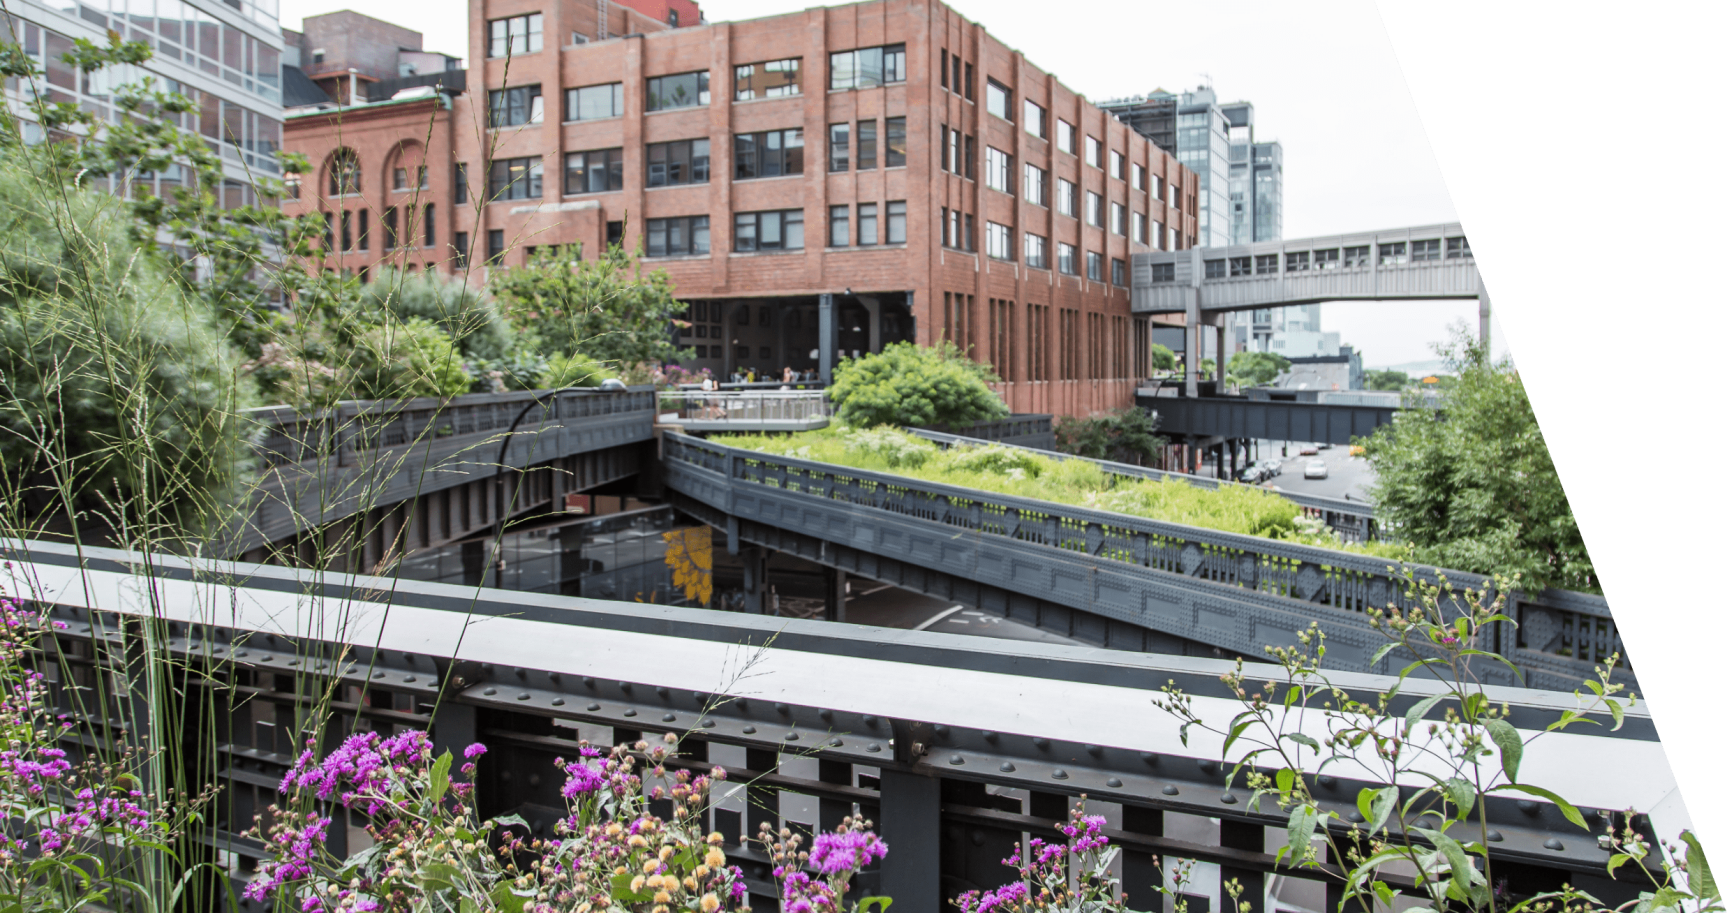 Chelsea’s High Line, a vibrant park built on an old elevated railway line. Leaves on trees and shrubs, flowers in bloom.